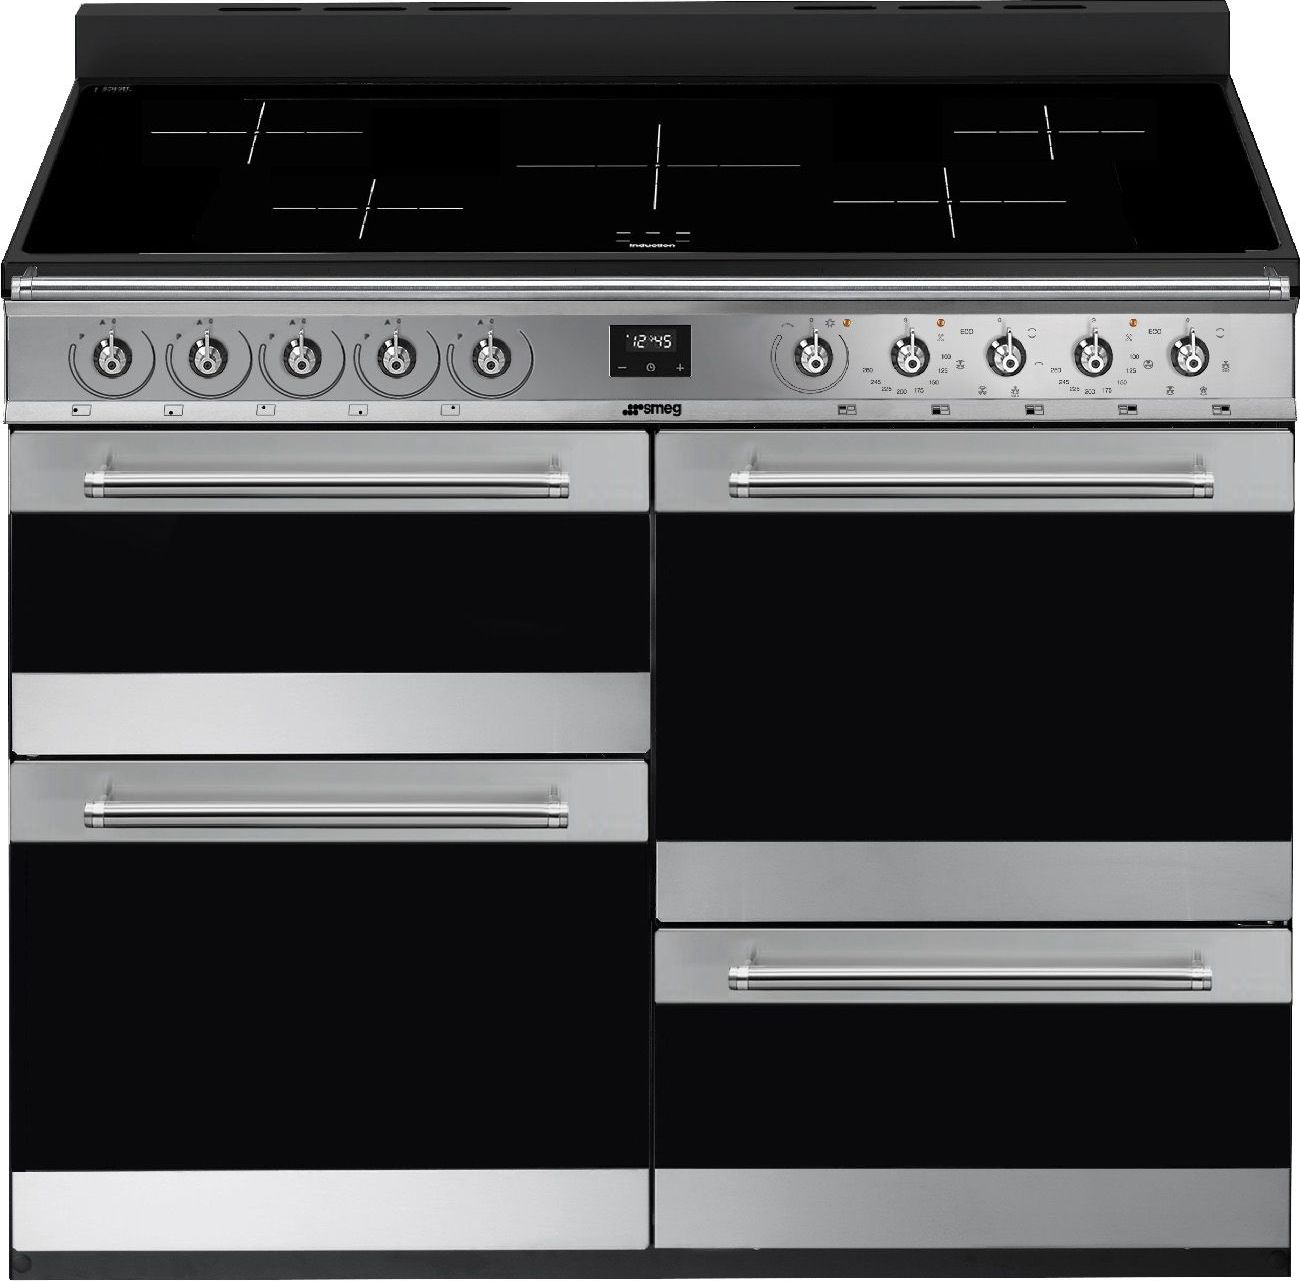 Smeg SYD4110I-1 Electric Range Cooker with Induction Hob - Stainless Steel - A/A Rated, Stainless Steel